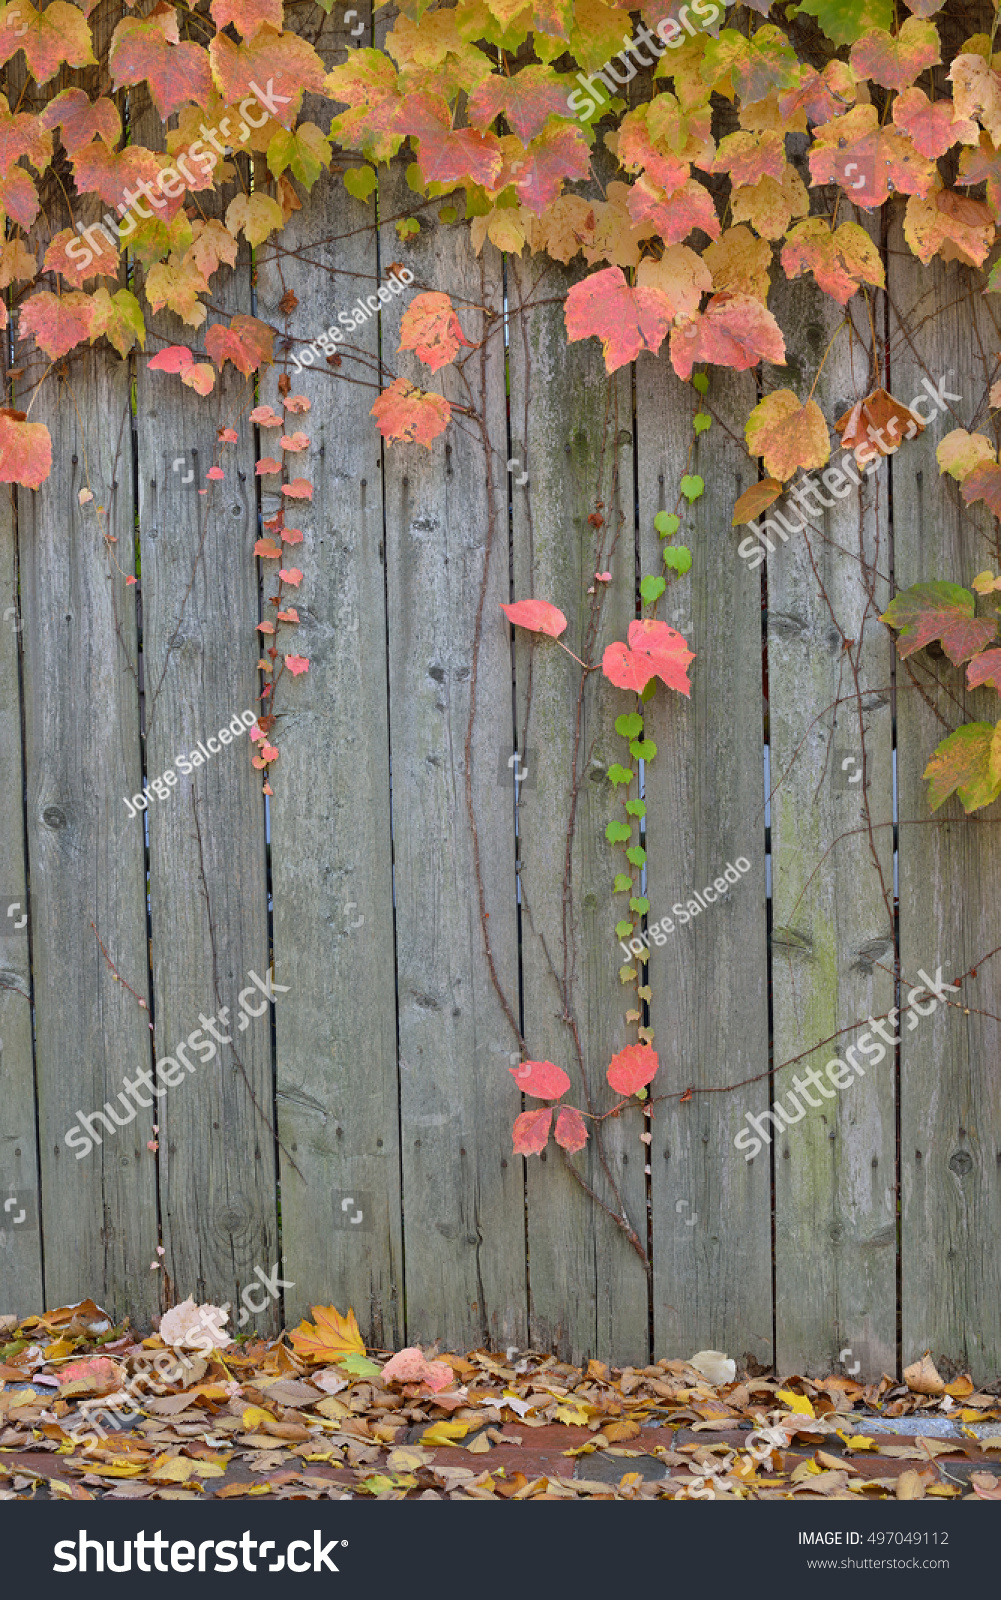 YongFoto 15x10ft Vintage Weathered Wood Board Backdrop for Photography Green Boston Ivy Virginia Creeper Plants Floral Wall Wood Fence Photography Backdrop Wedding Women Photo Shoot Video YouTube